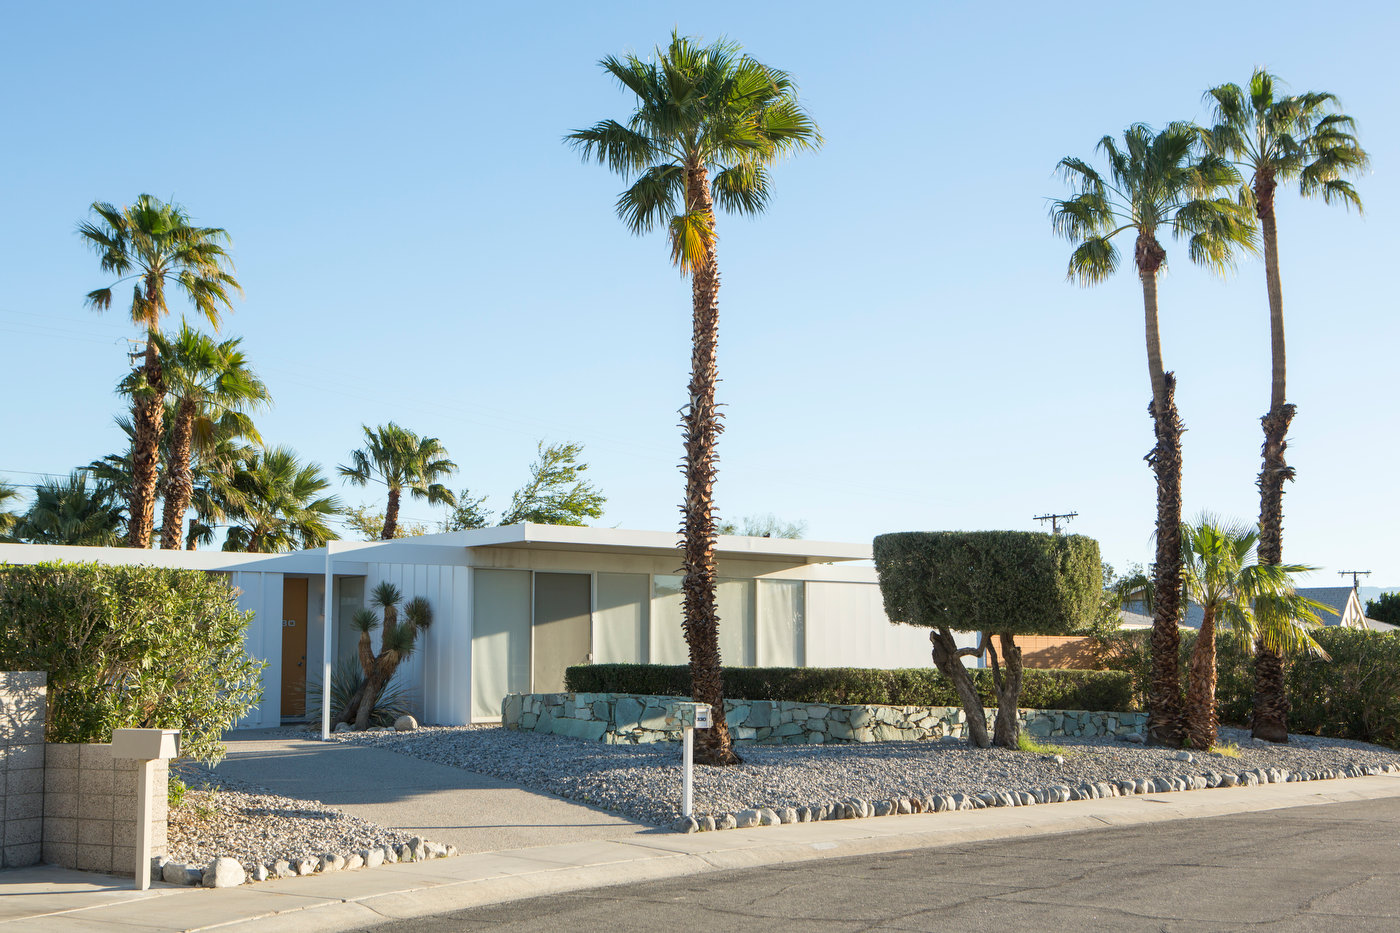 Donald A. Wekler, Mid-century modern, Palm Springs (for IDEAT).